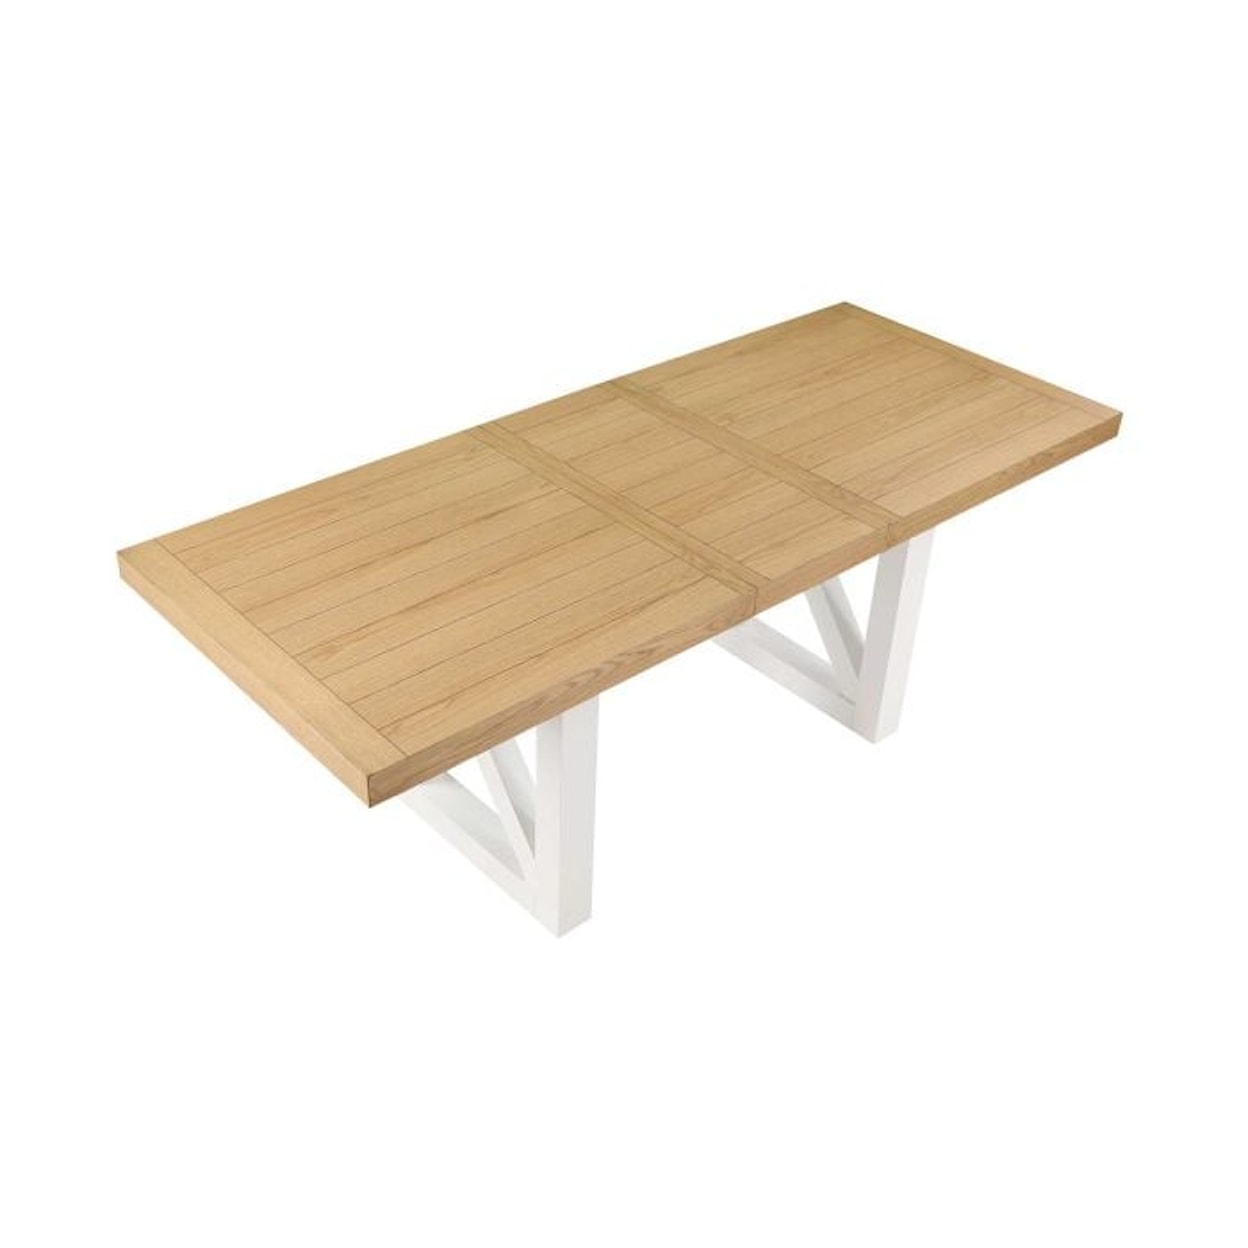 Steve Silver Magnolia Counter Height Dining Table